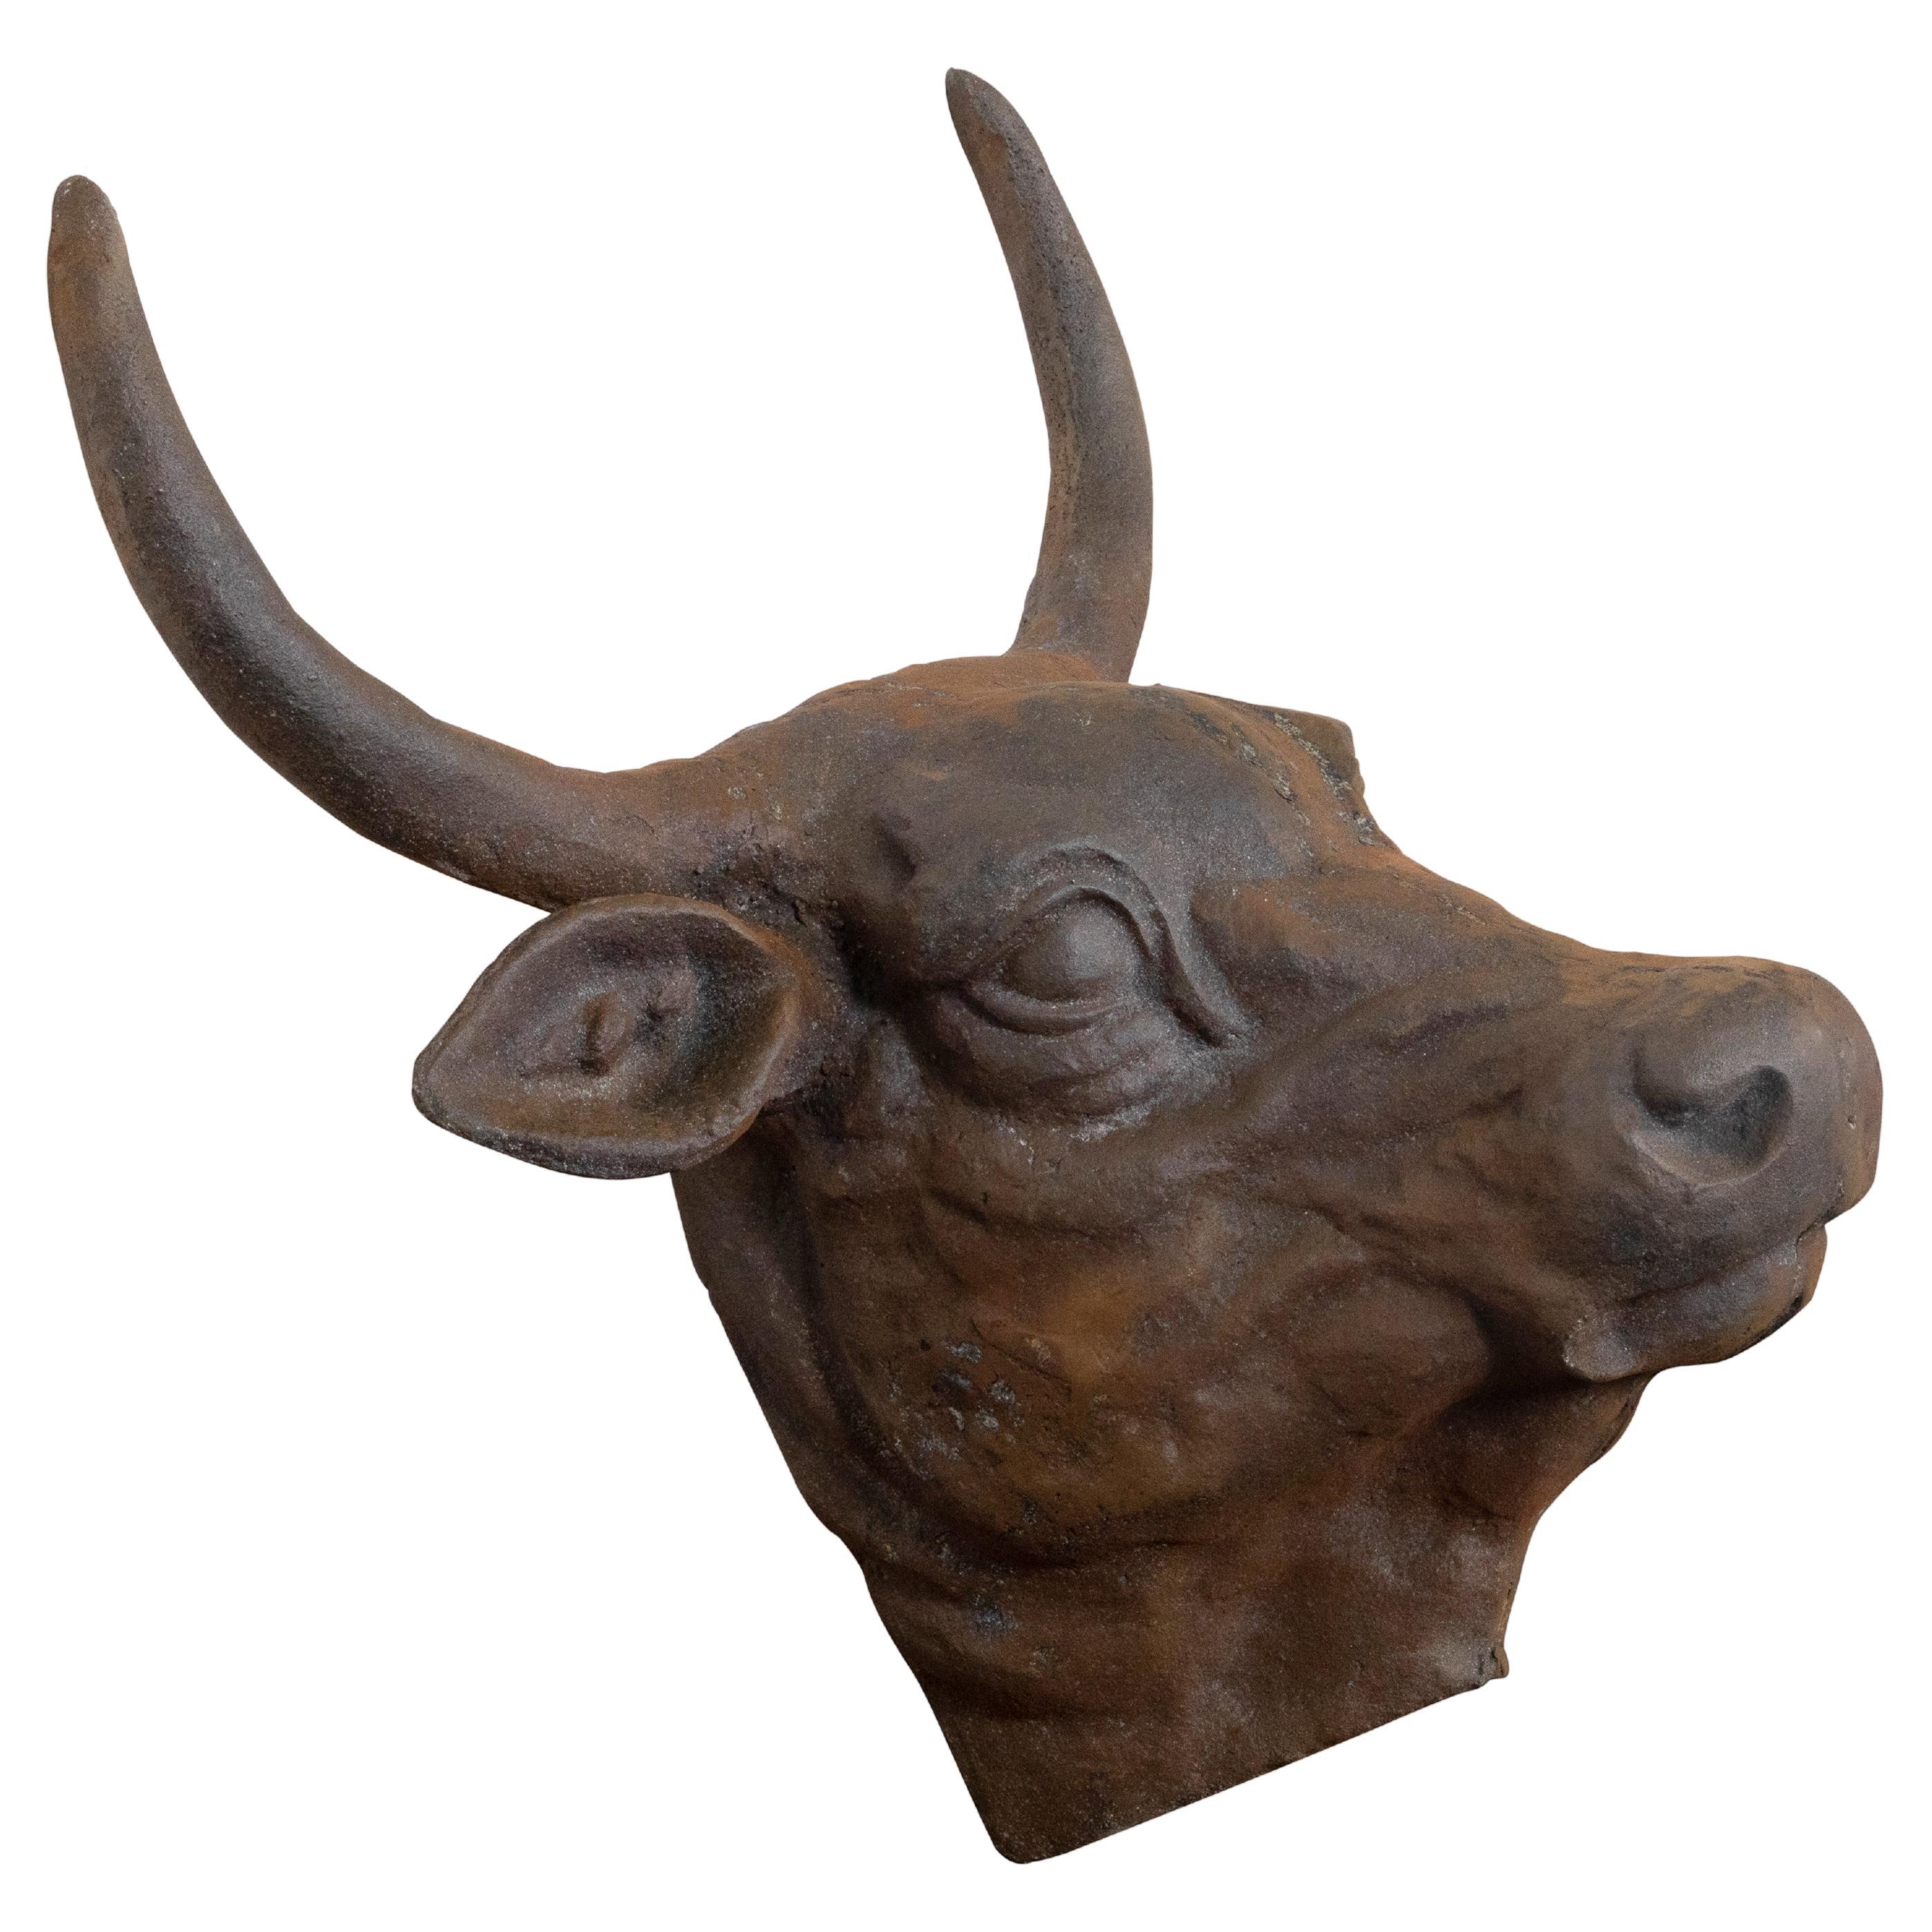 English 1930s-1940s Cast Iron Bull Wall Hanging Sculpture with Rusty Patina